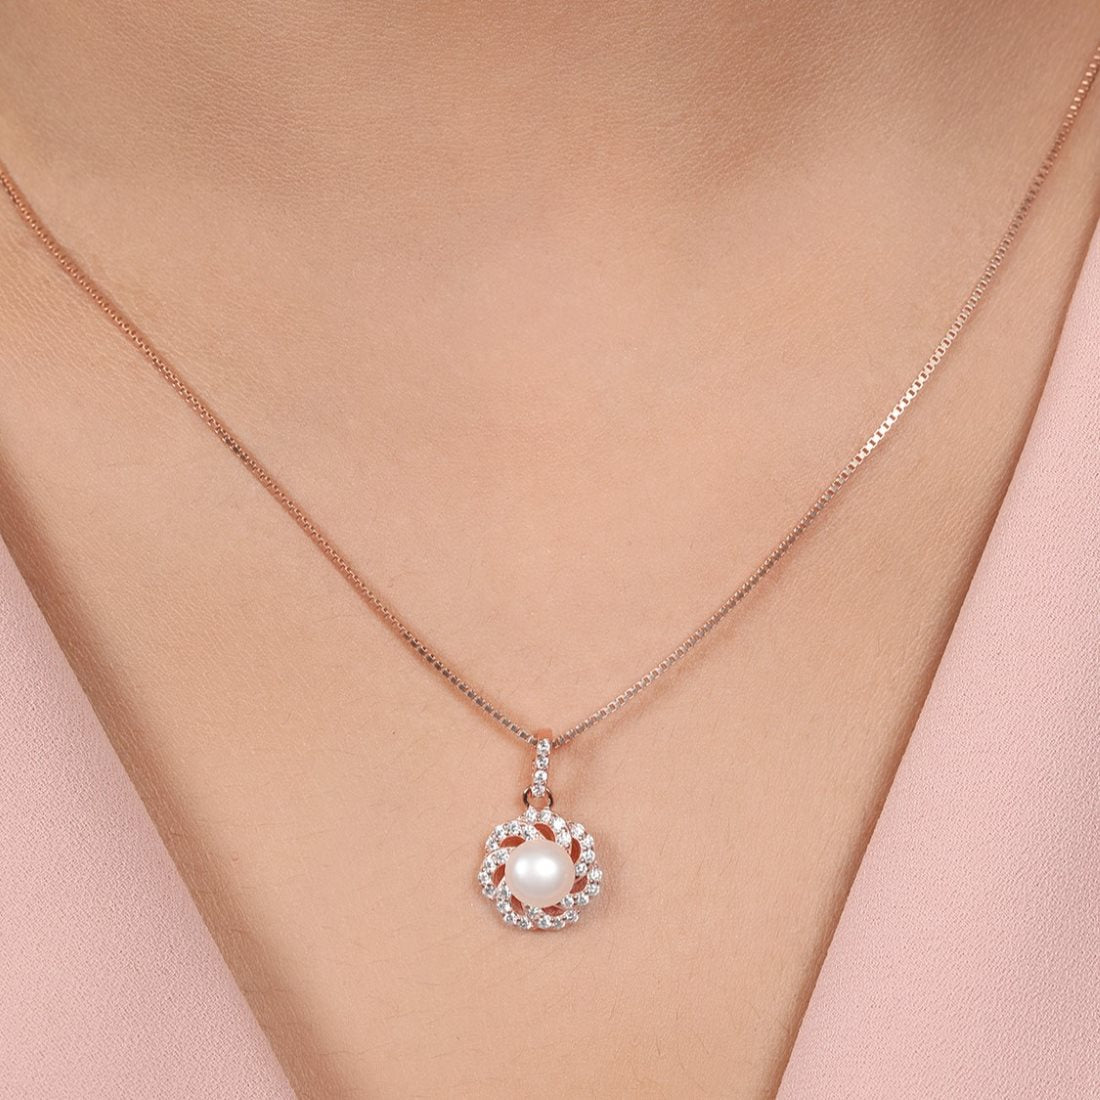 Petals of Grace Rose Gold-Plated 925 Sterling Silver Pearl Pendant with Chain